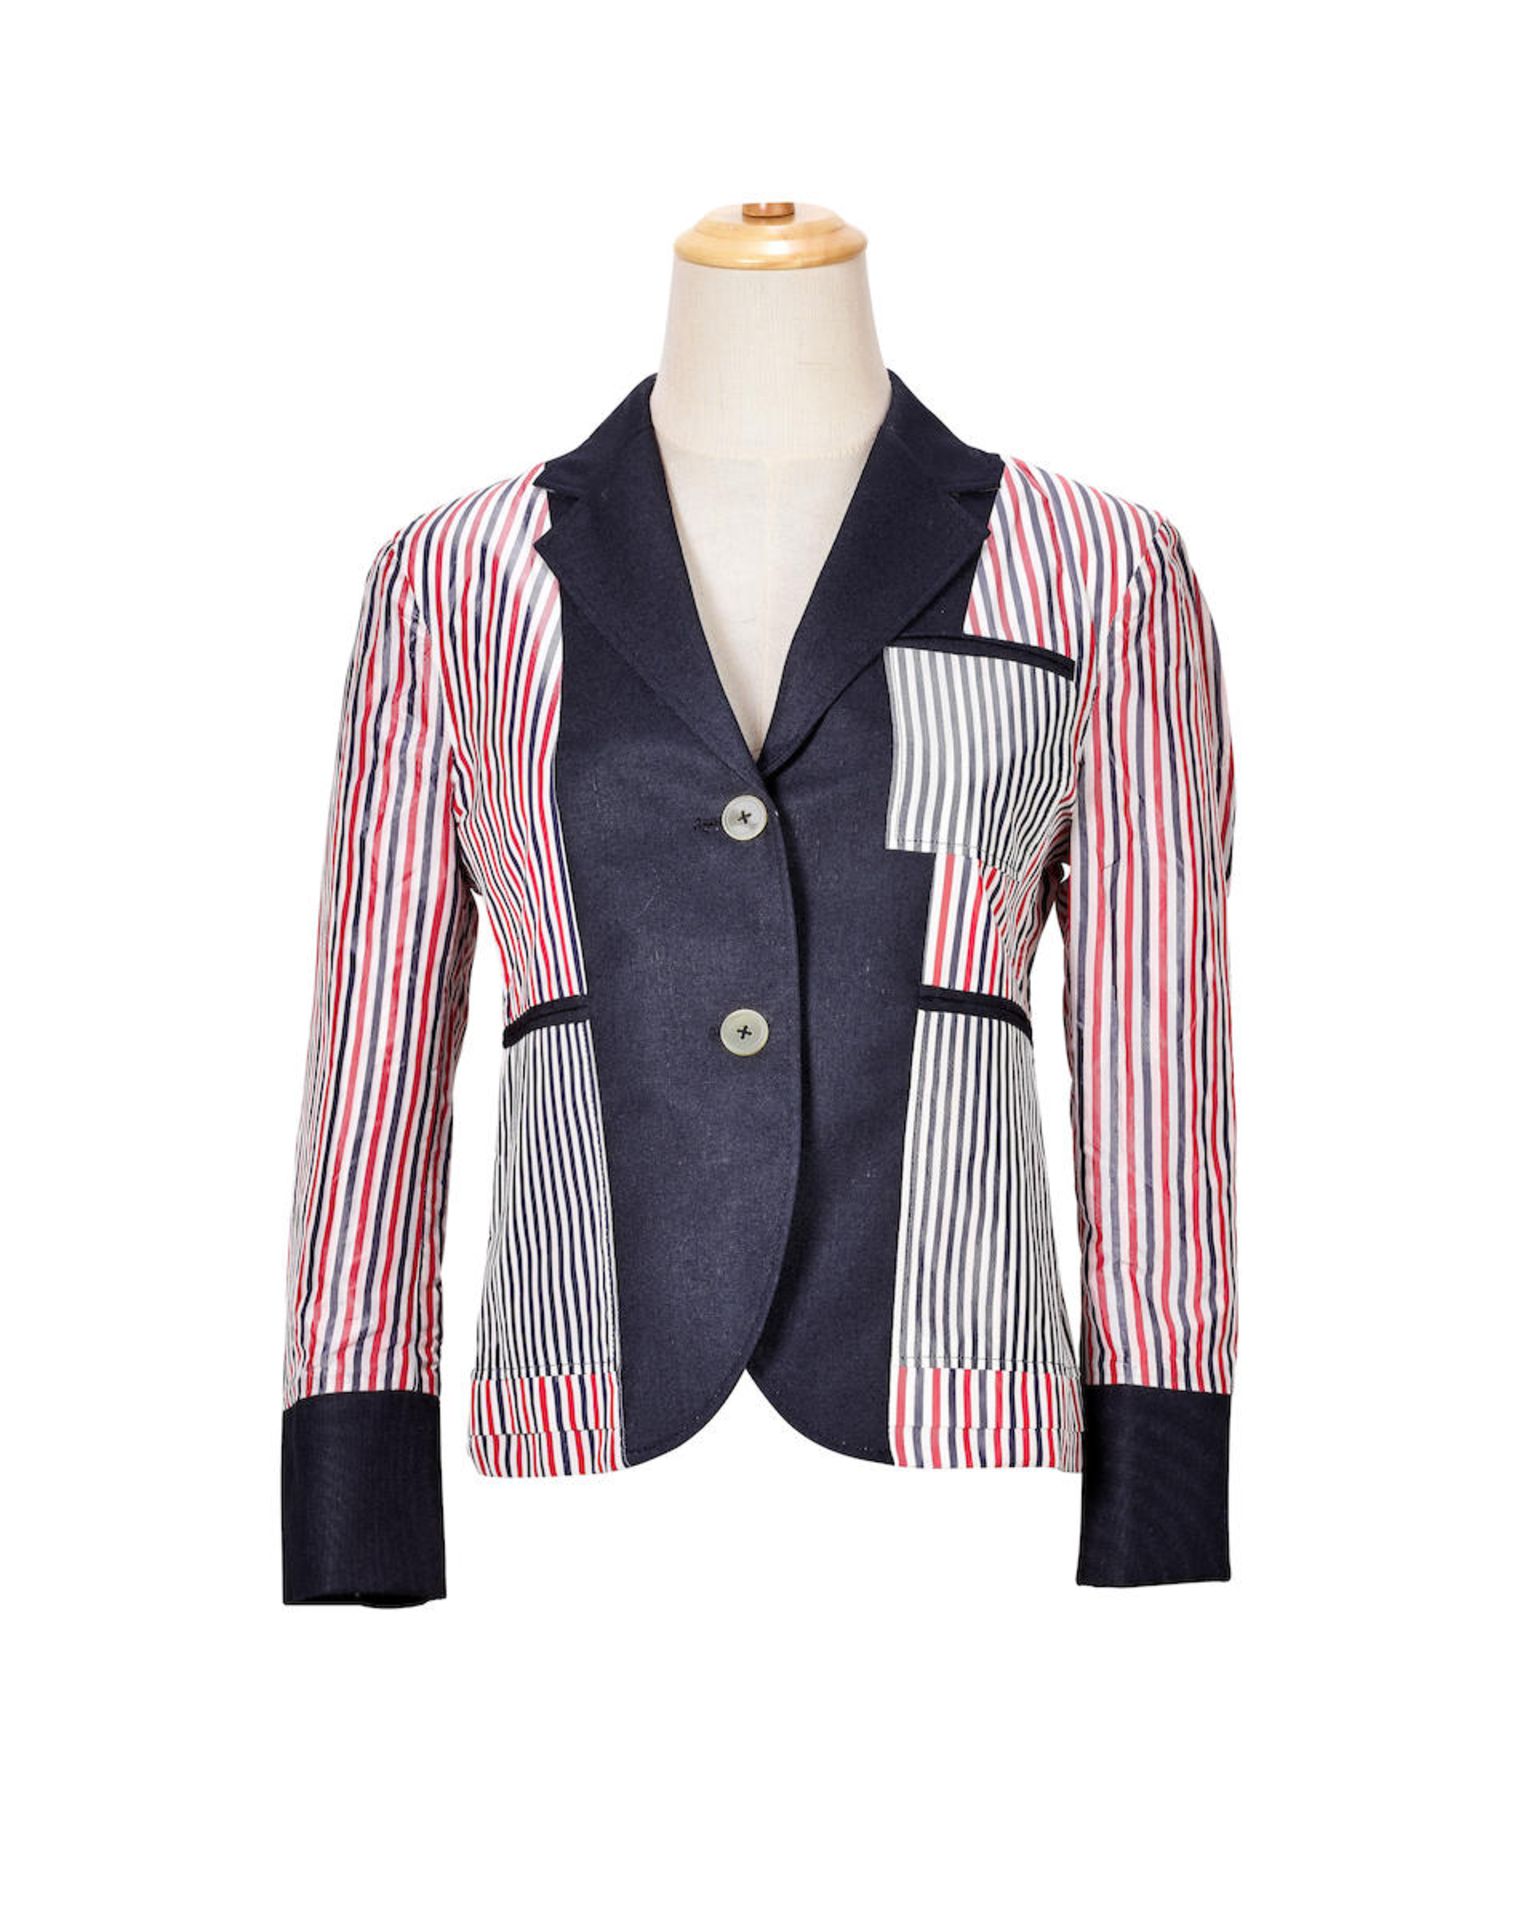 [NO RESERVE] THOM BROWNE: RED AND BLUE STRIPED JACKET